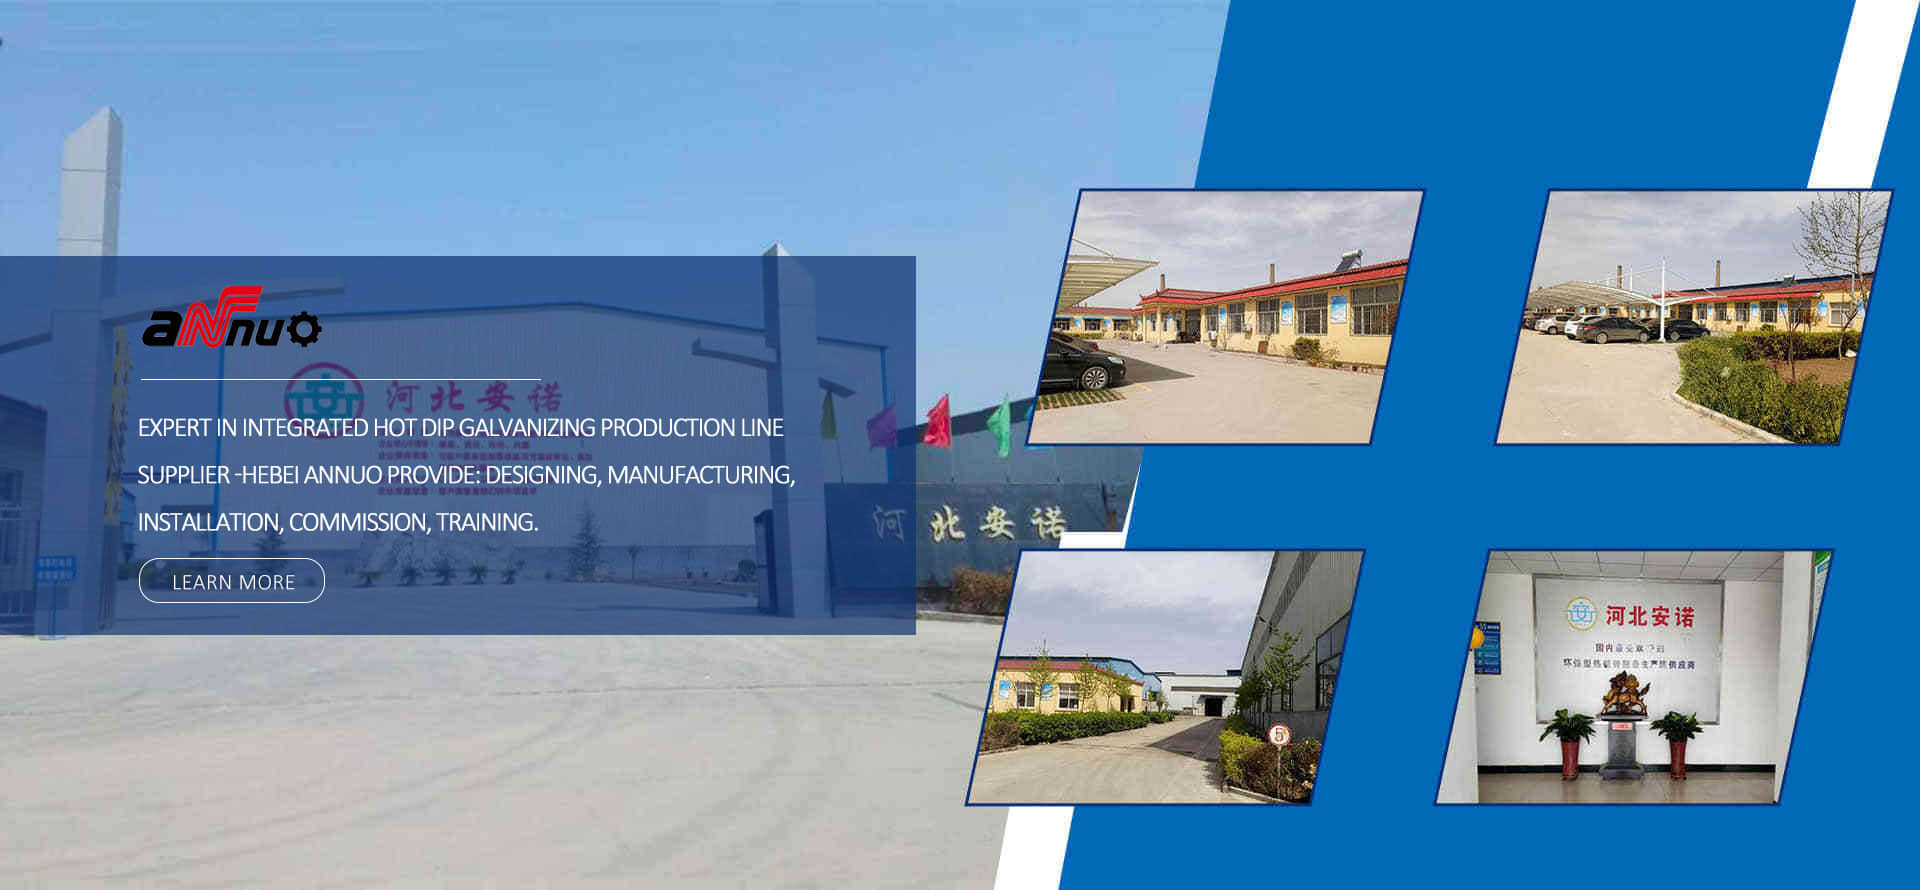 Expert in integrated Hot dip galvanizing production line supplier -Hebei Annuo Provide: Designing, Manufacturing, installation, Commission, Training.